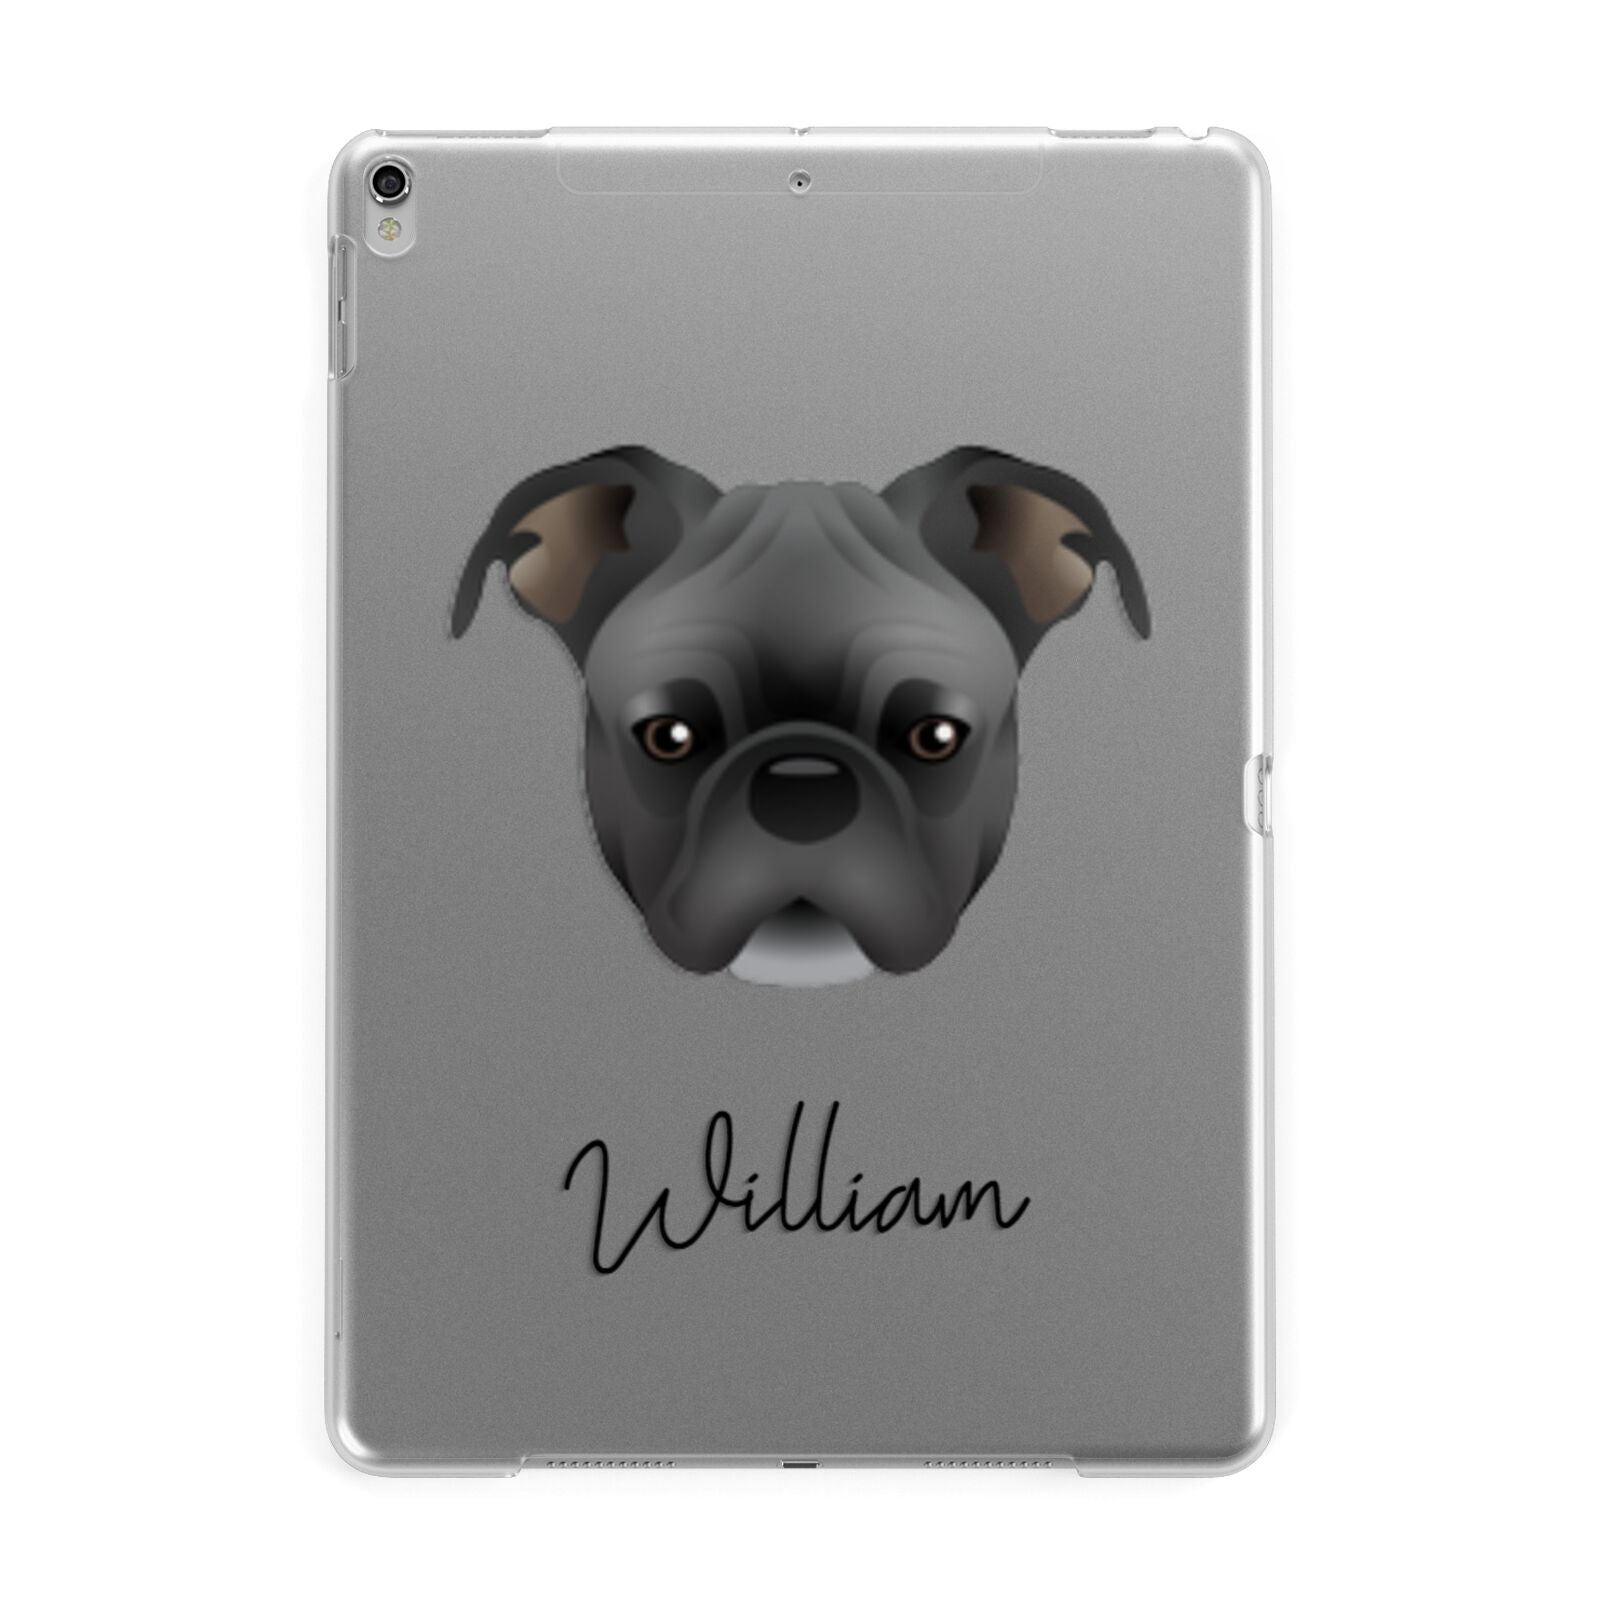 Bugg Personalised Apple iPad Silver Case